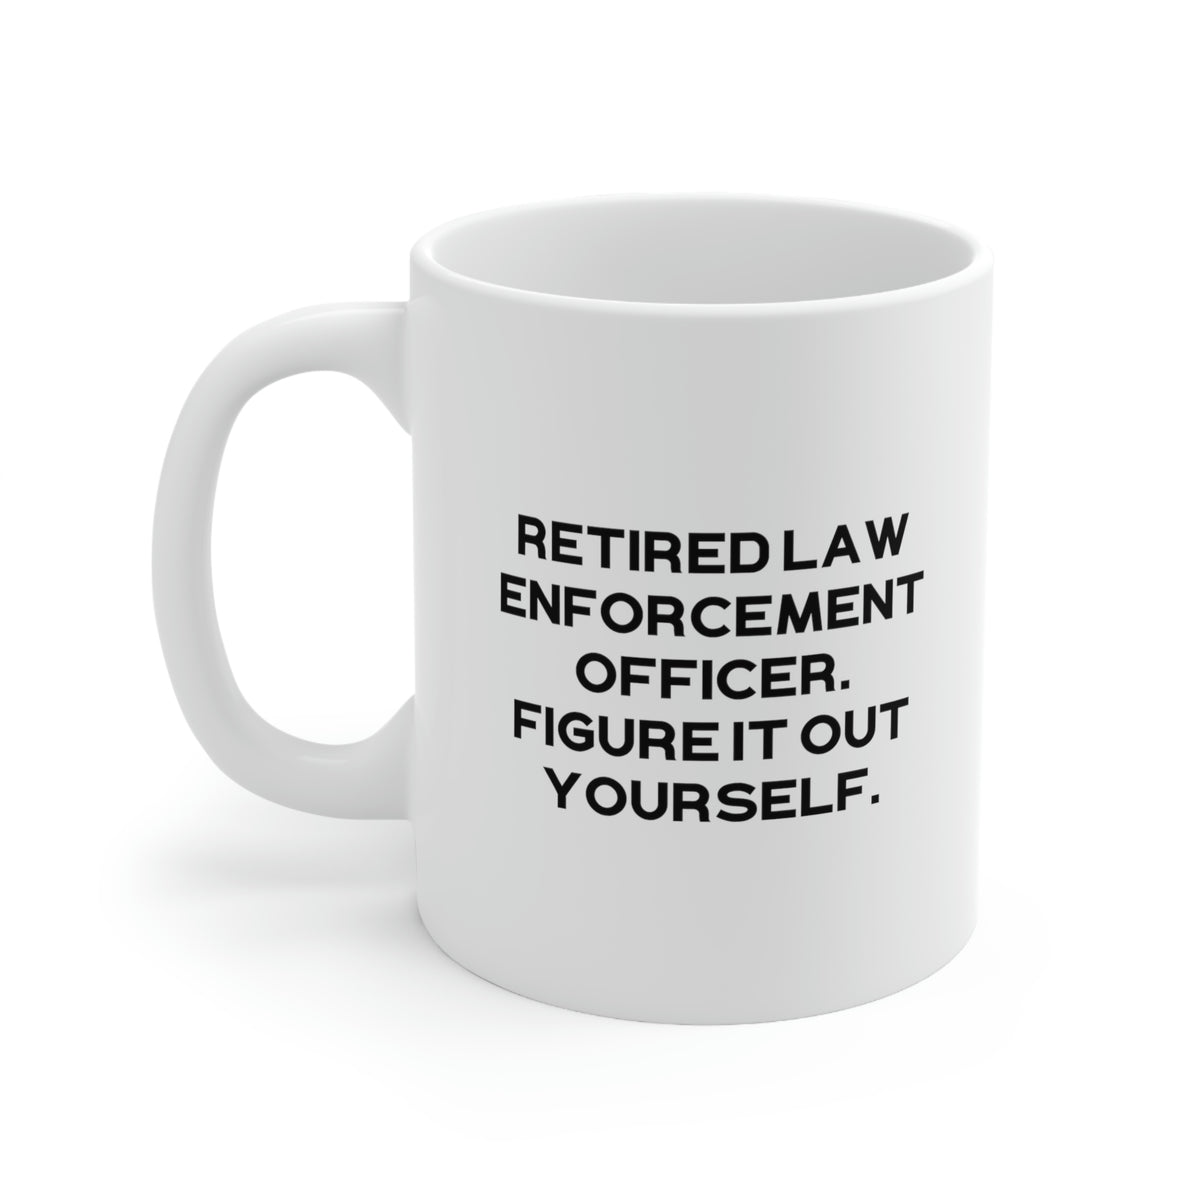 Unique Law enforcement officer Gifts, Retired Law Enforcement Officer. Figure It Out, Cool Holiday 11oz 15oz Mug From Colleagues 2